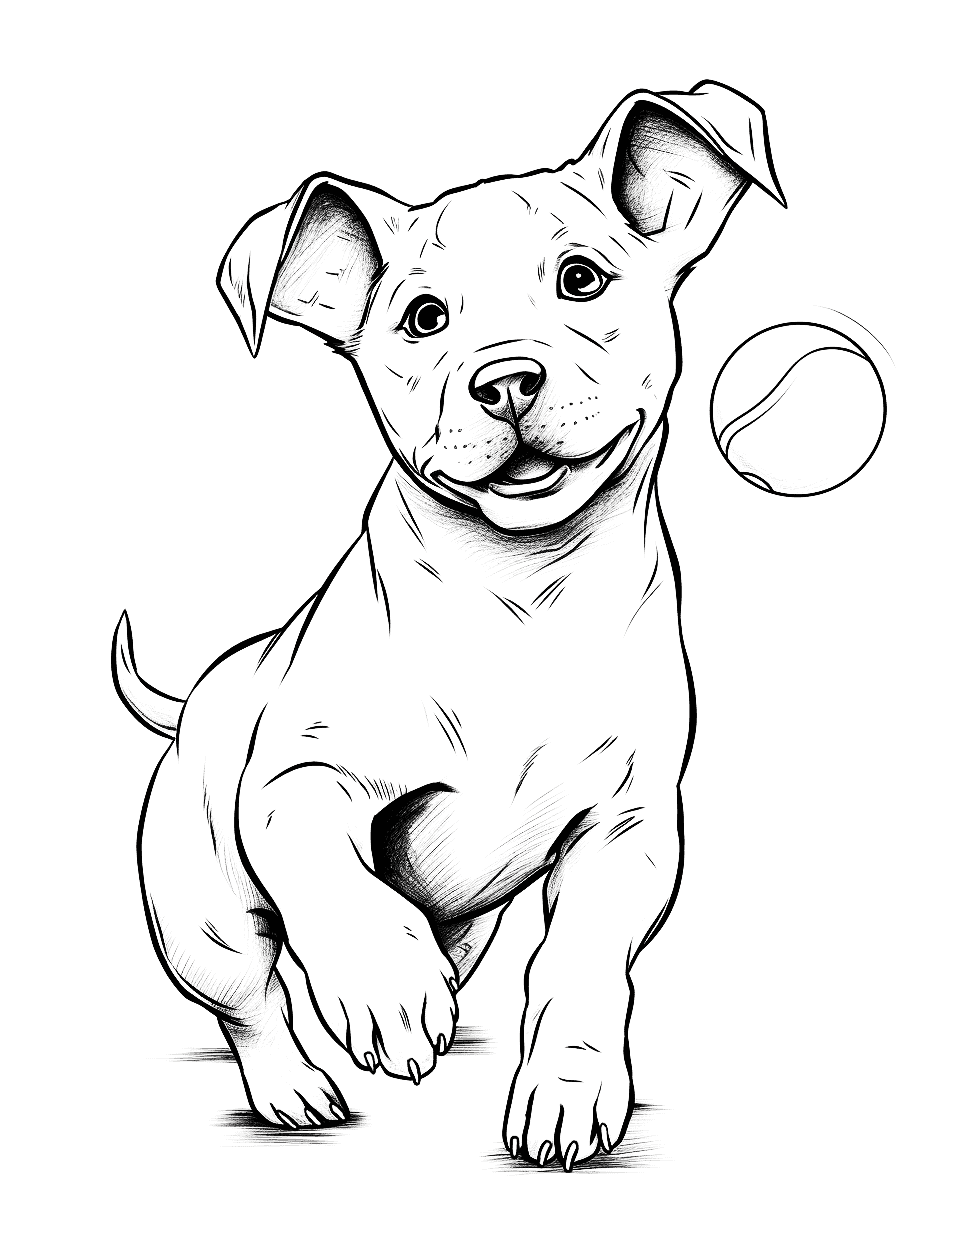 Action Shot Pitbull Catching a Ball Puppy Coloring Page - A Pitbull puppy leaping to catch a ball in mid-air.